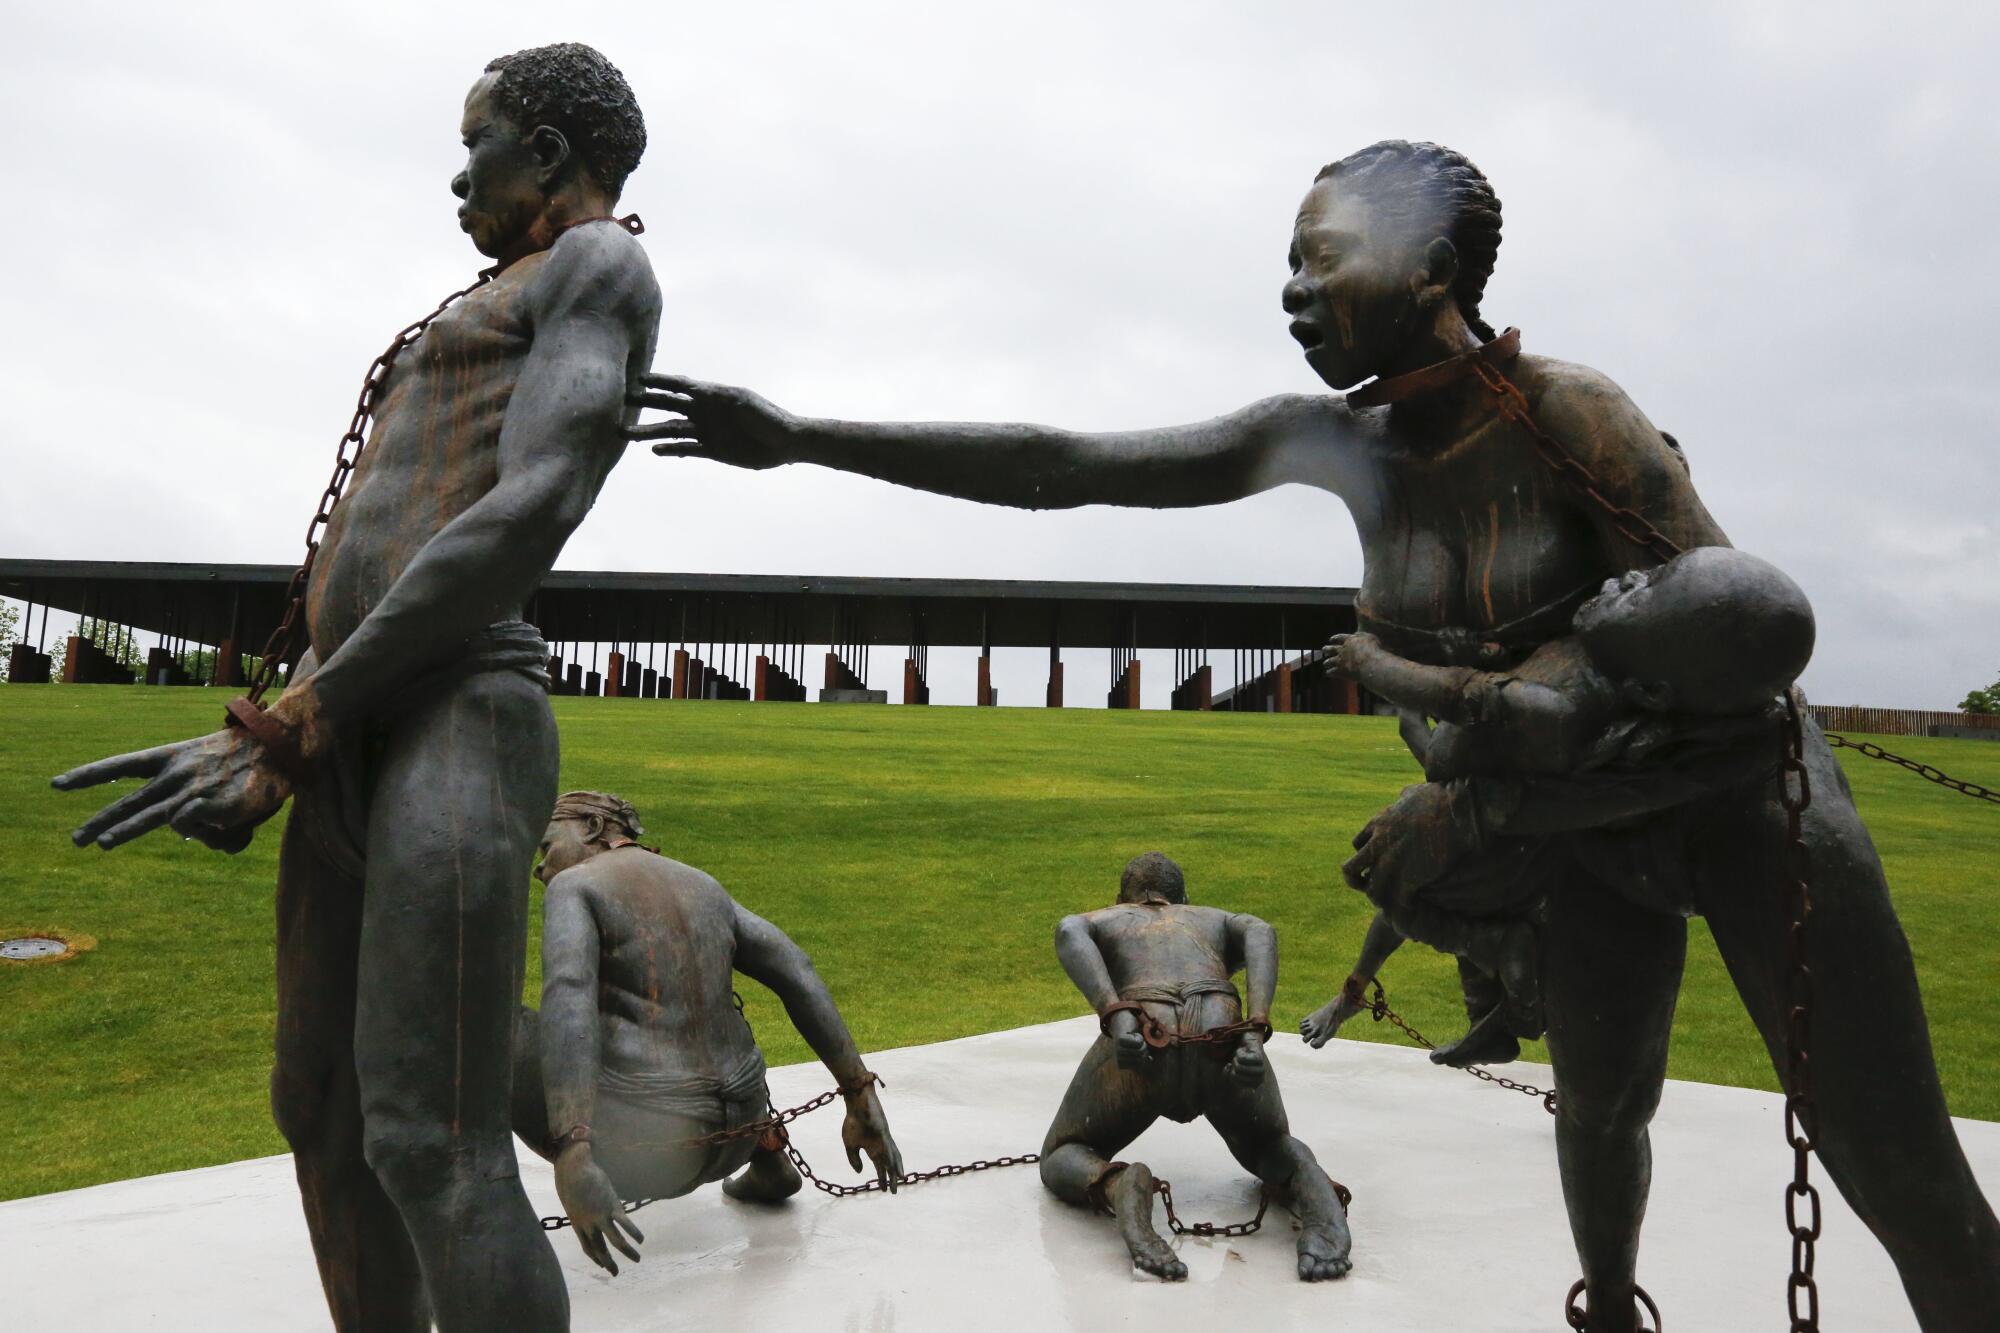 Statues of slaves chained together at the National Memorial for Peace and Justice in Montgomery, Ala.